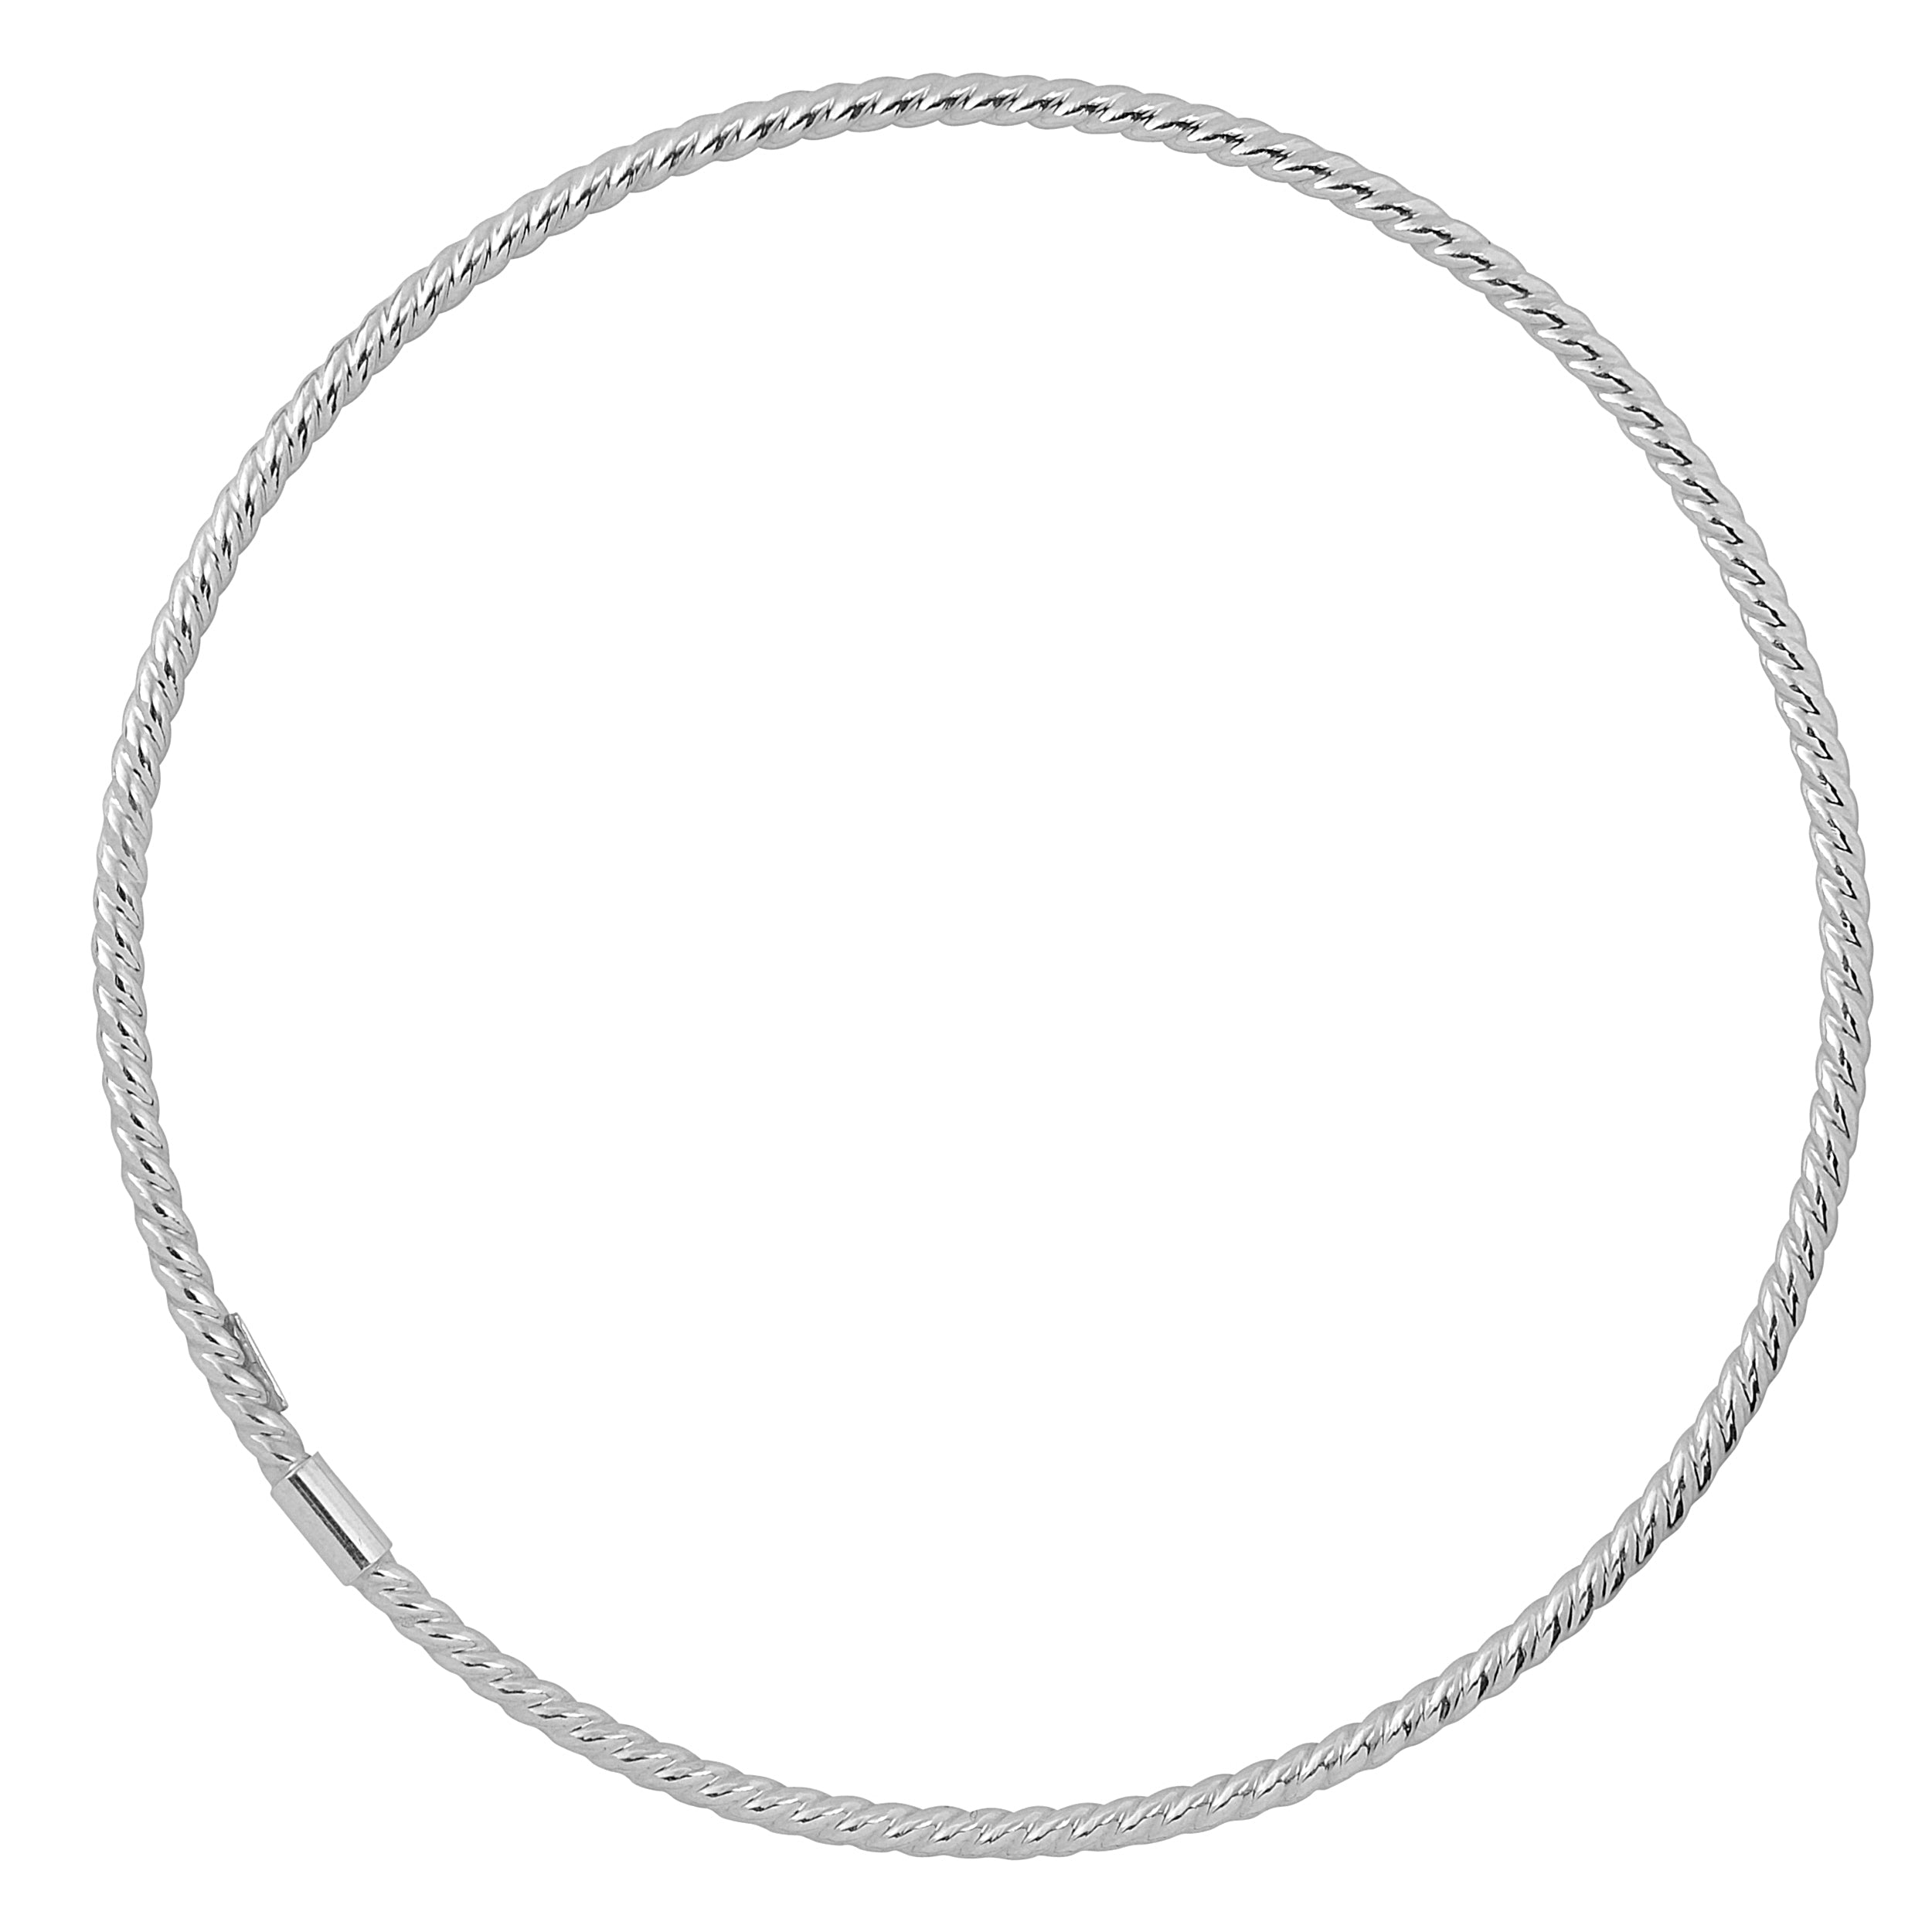 10k White Gold Twisted Cable Women's Bangle Bracelet, 8" fine designer jewelry for men and women